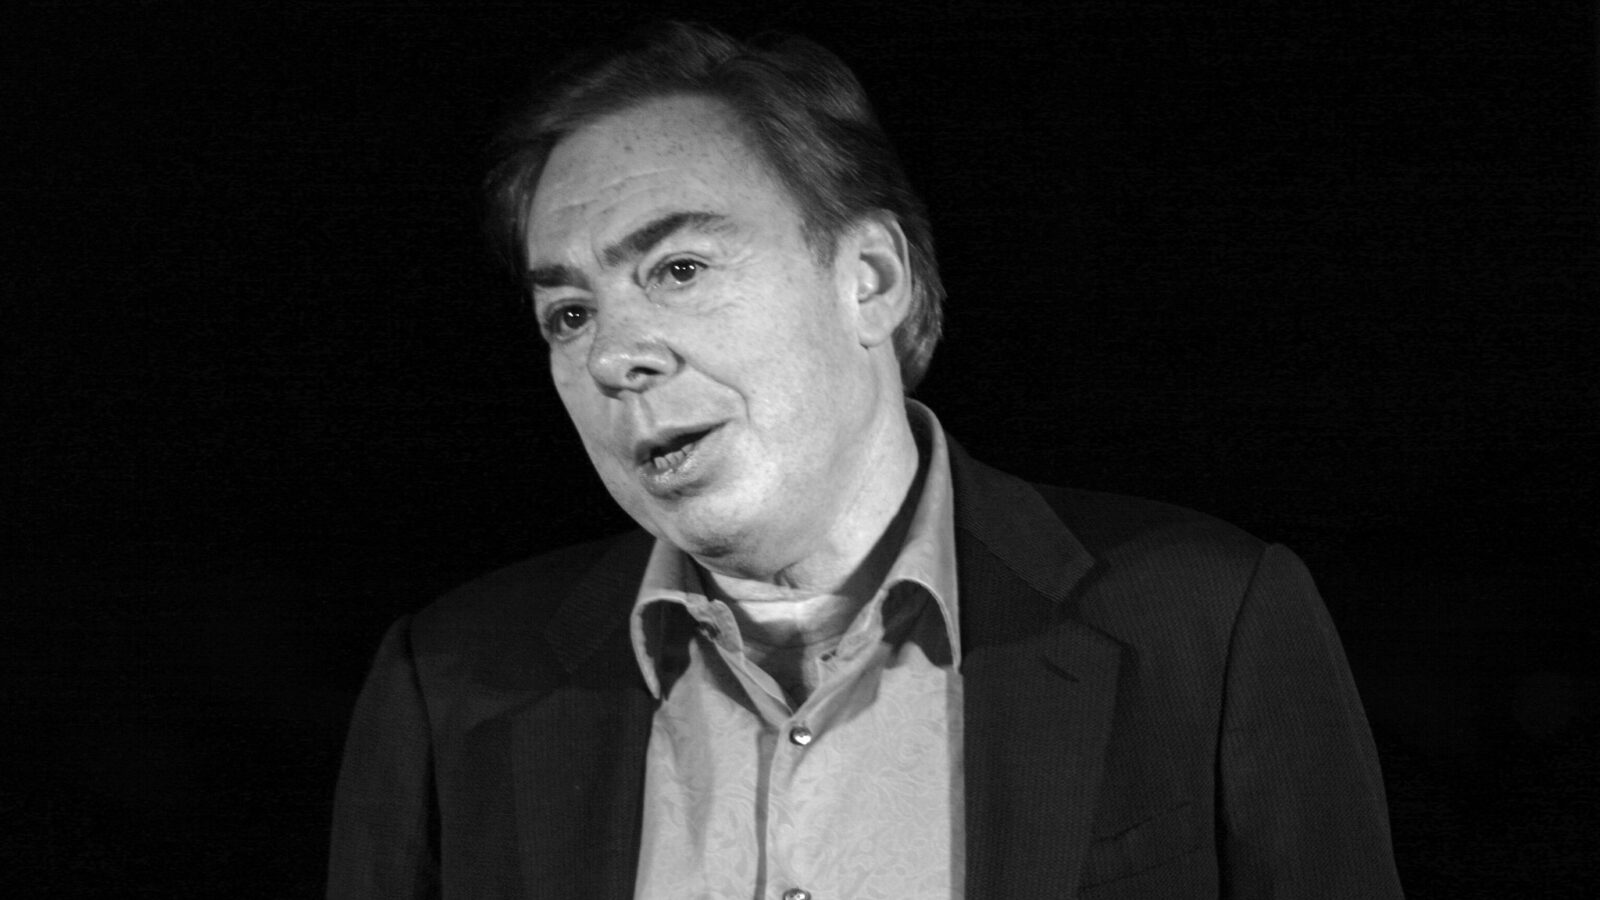 Featured image for “Nicholas Lloyd Webber, son of famed composer, dies at 43”